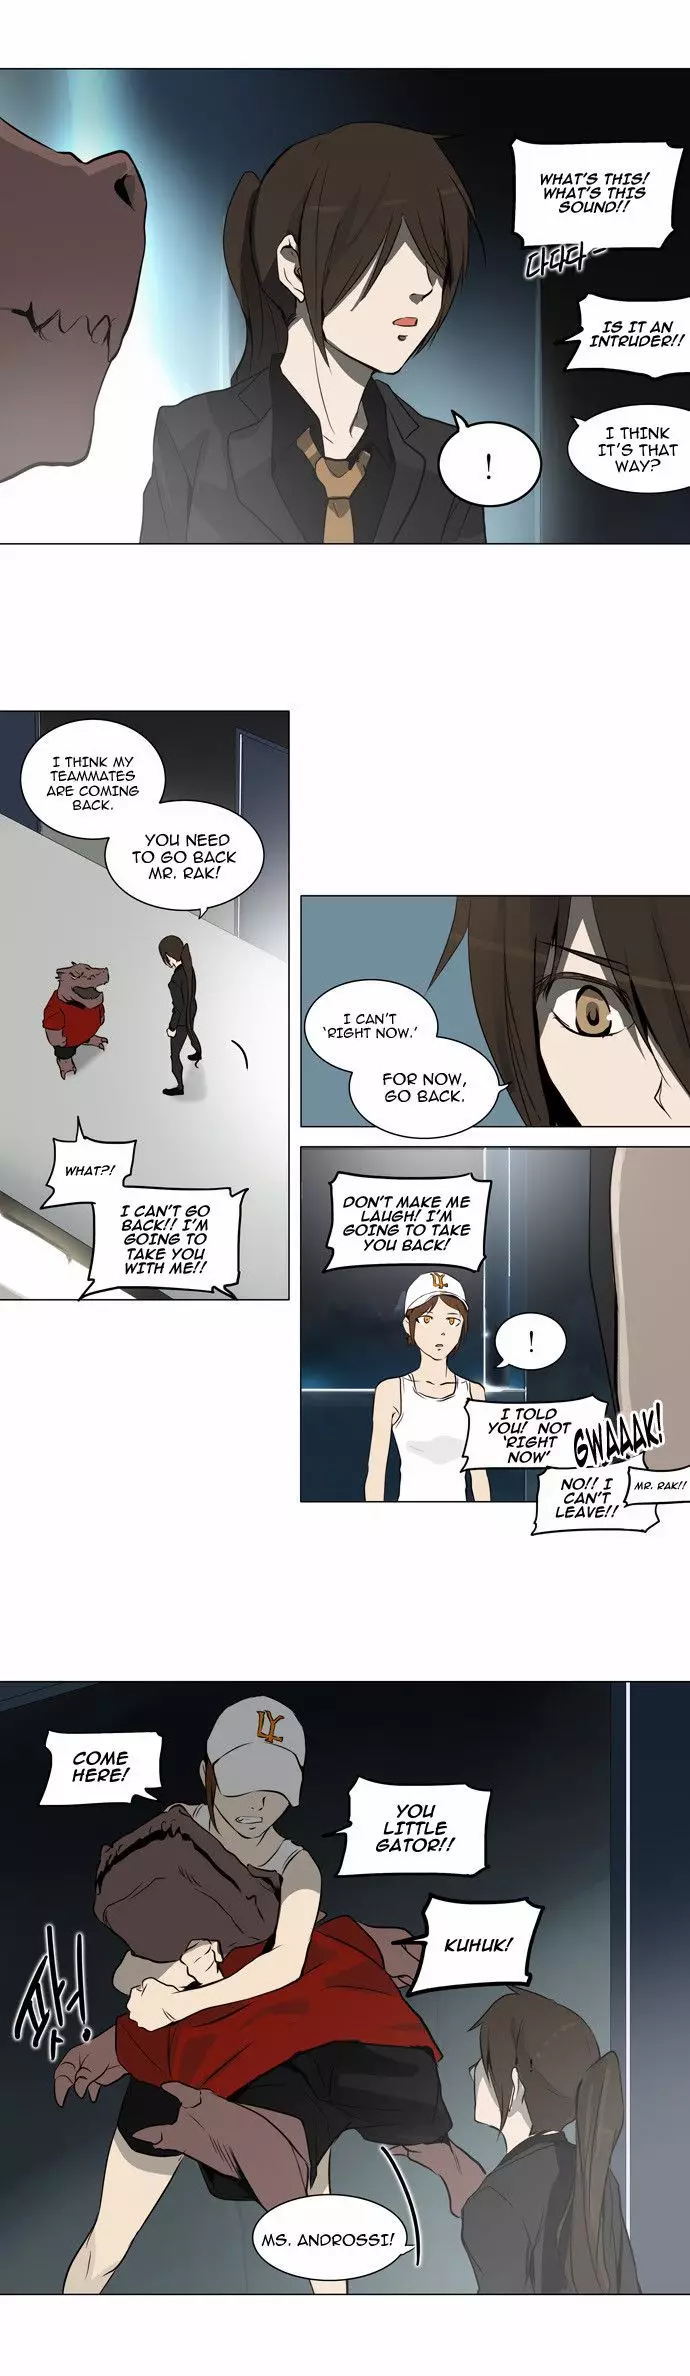 Tower of God - 160 page p_00019